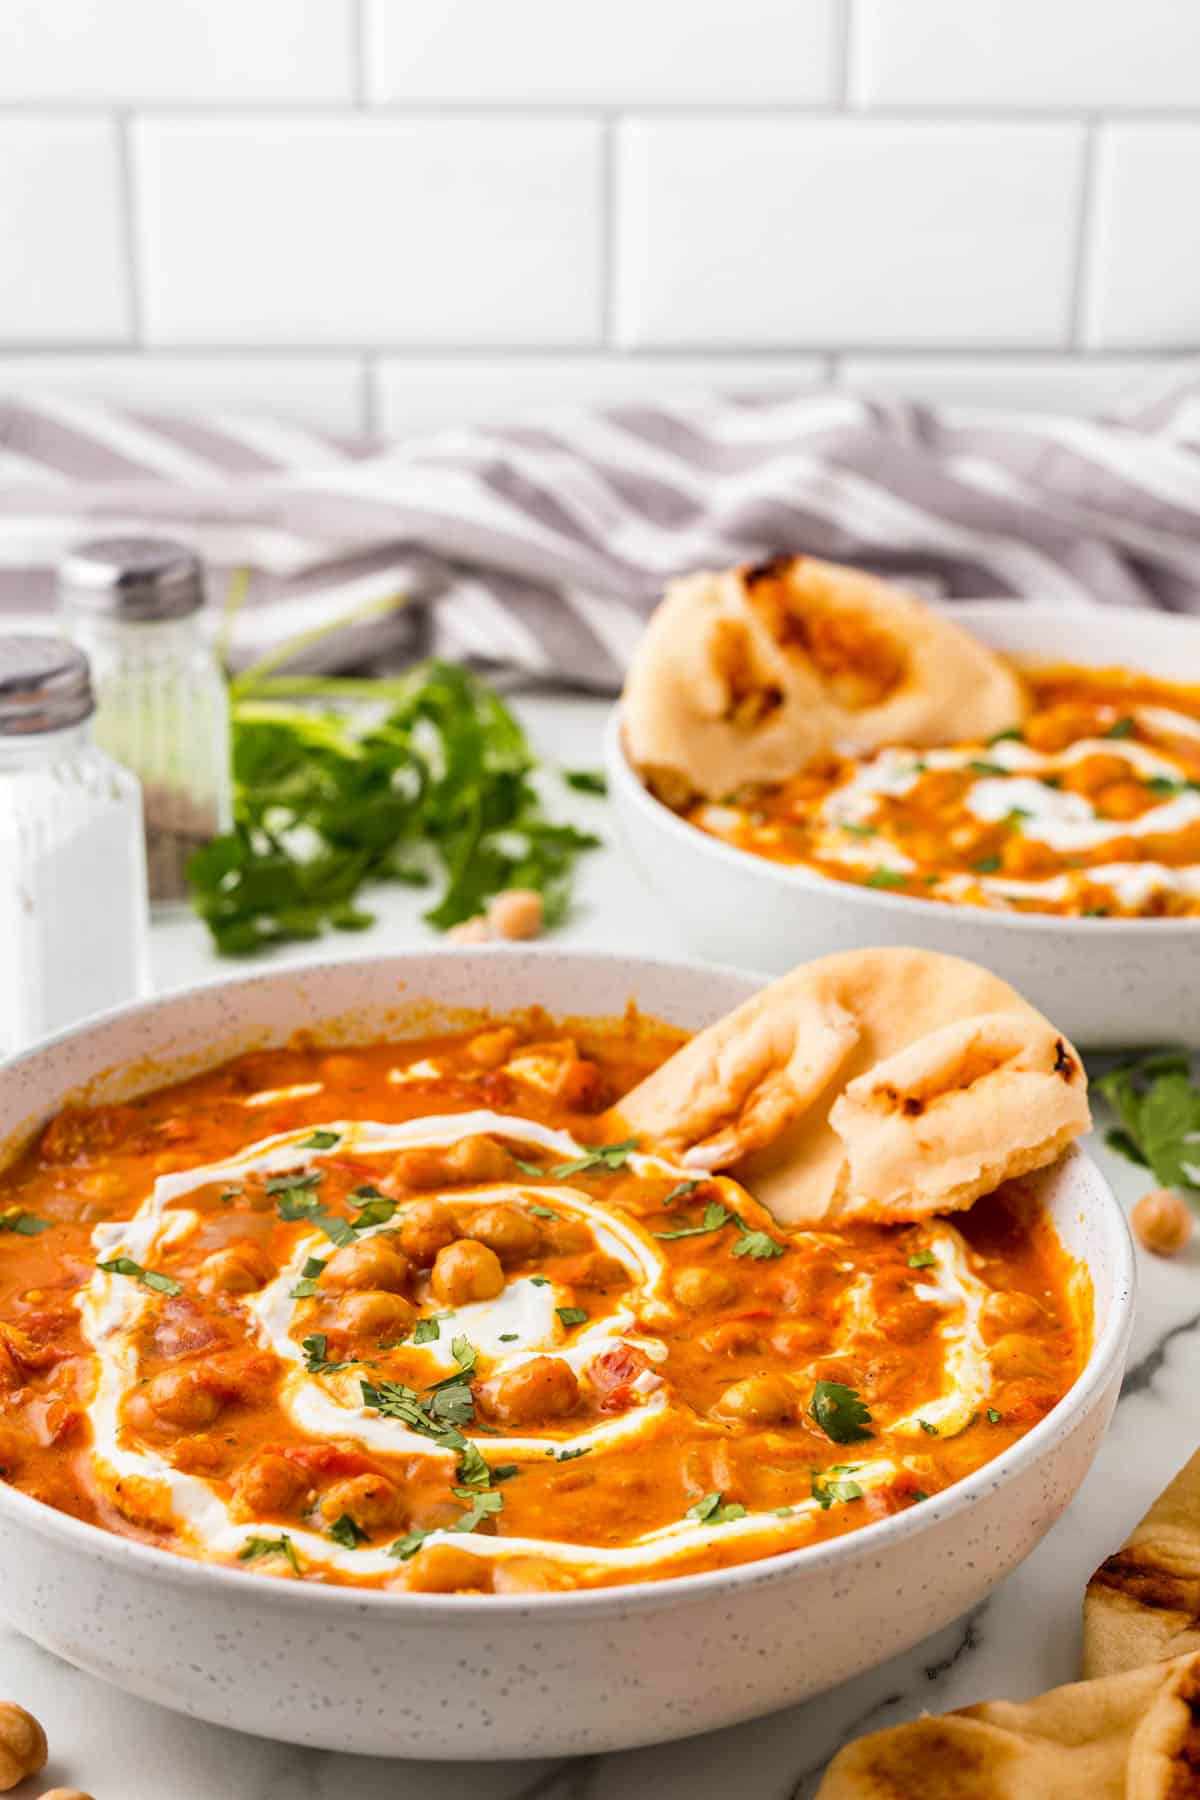 Bowls of chickpea curry with naan bread stuck in. 